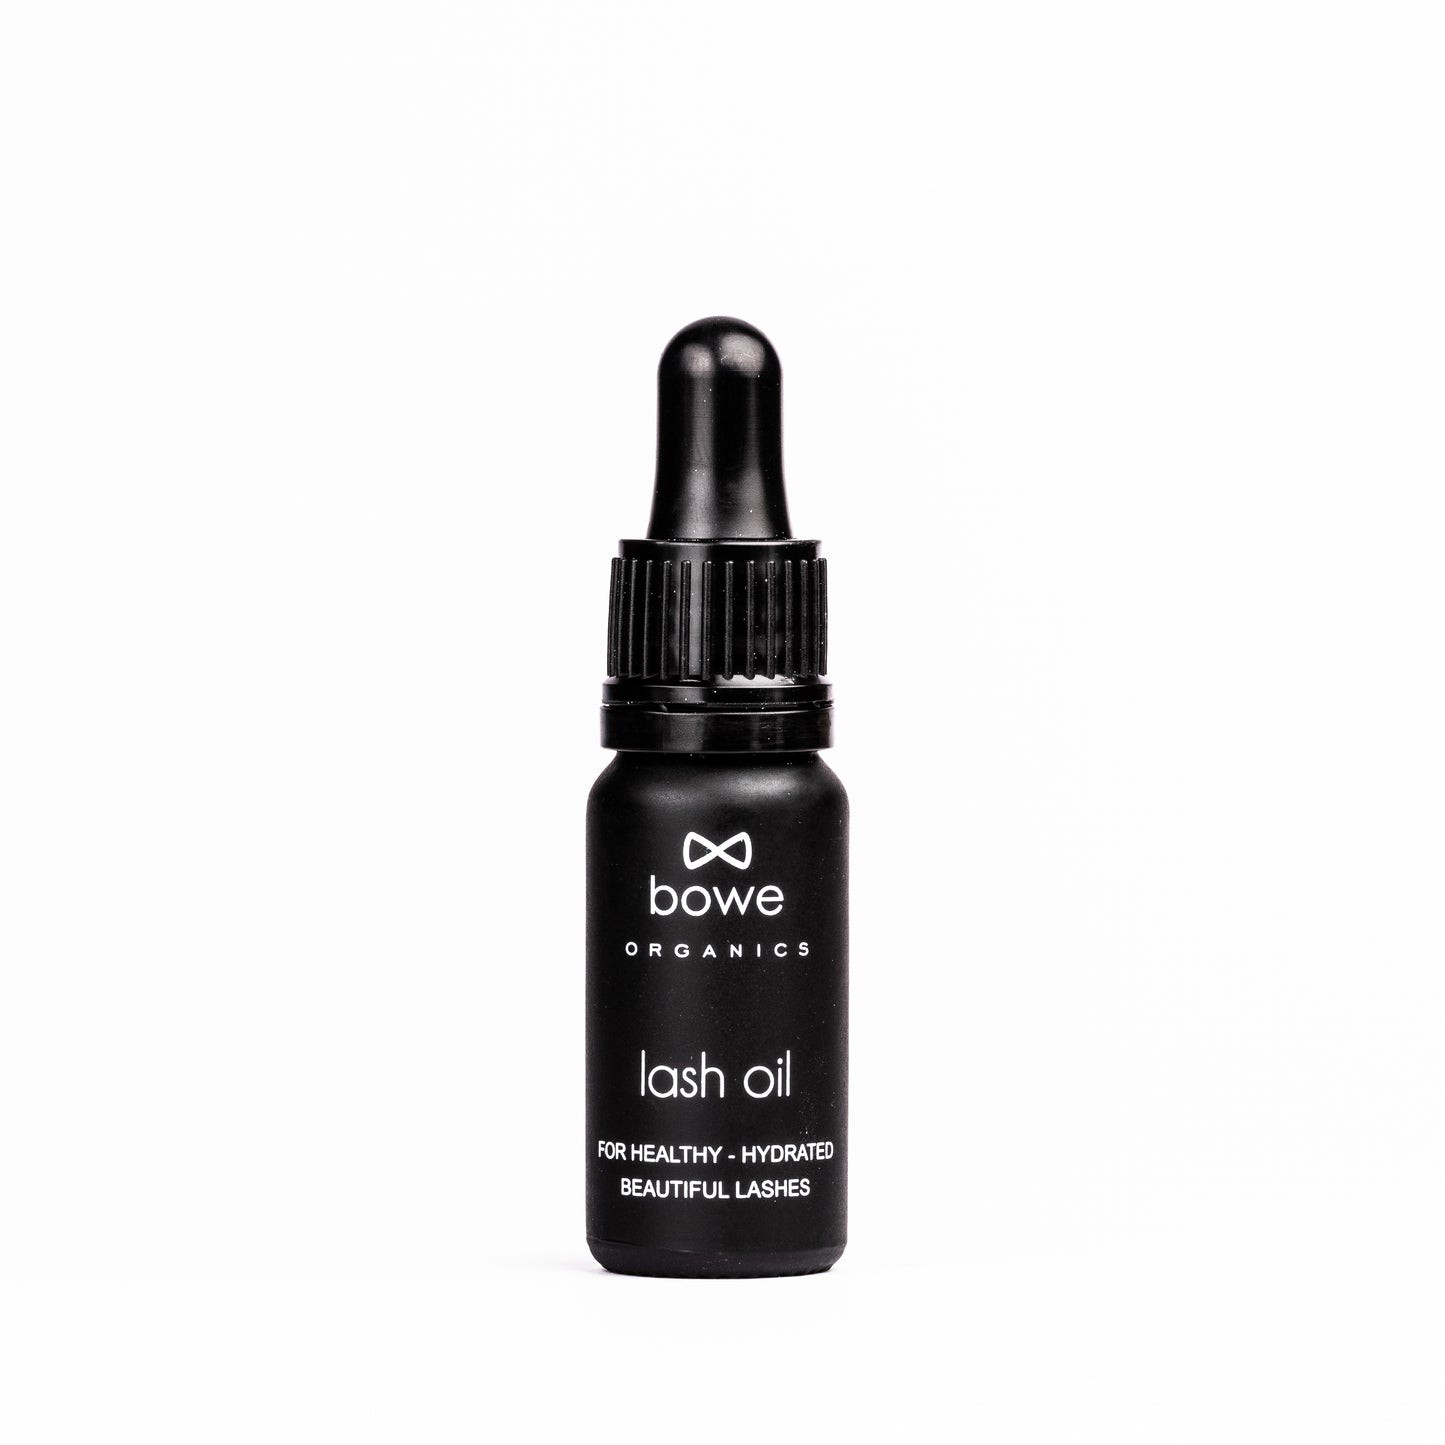 Bowe Organics Lash Oil photographed on a white background. the vegan lash treatment oil is in a matt black glass bottle with a black rubber and plastic pipette. the label reads 'bowe organics lash oil for healthy, hydrated beautiful lashes'